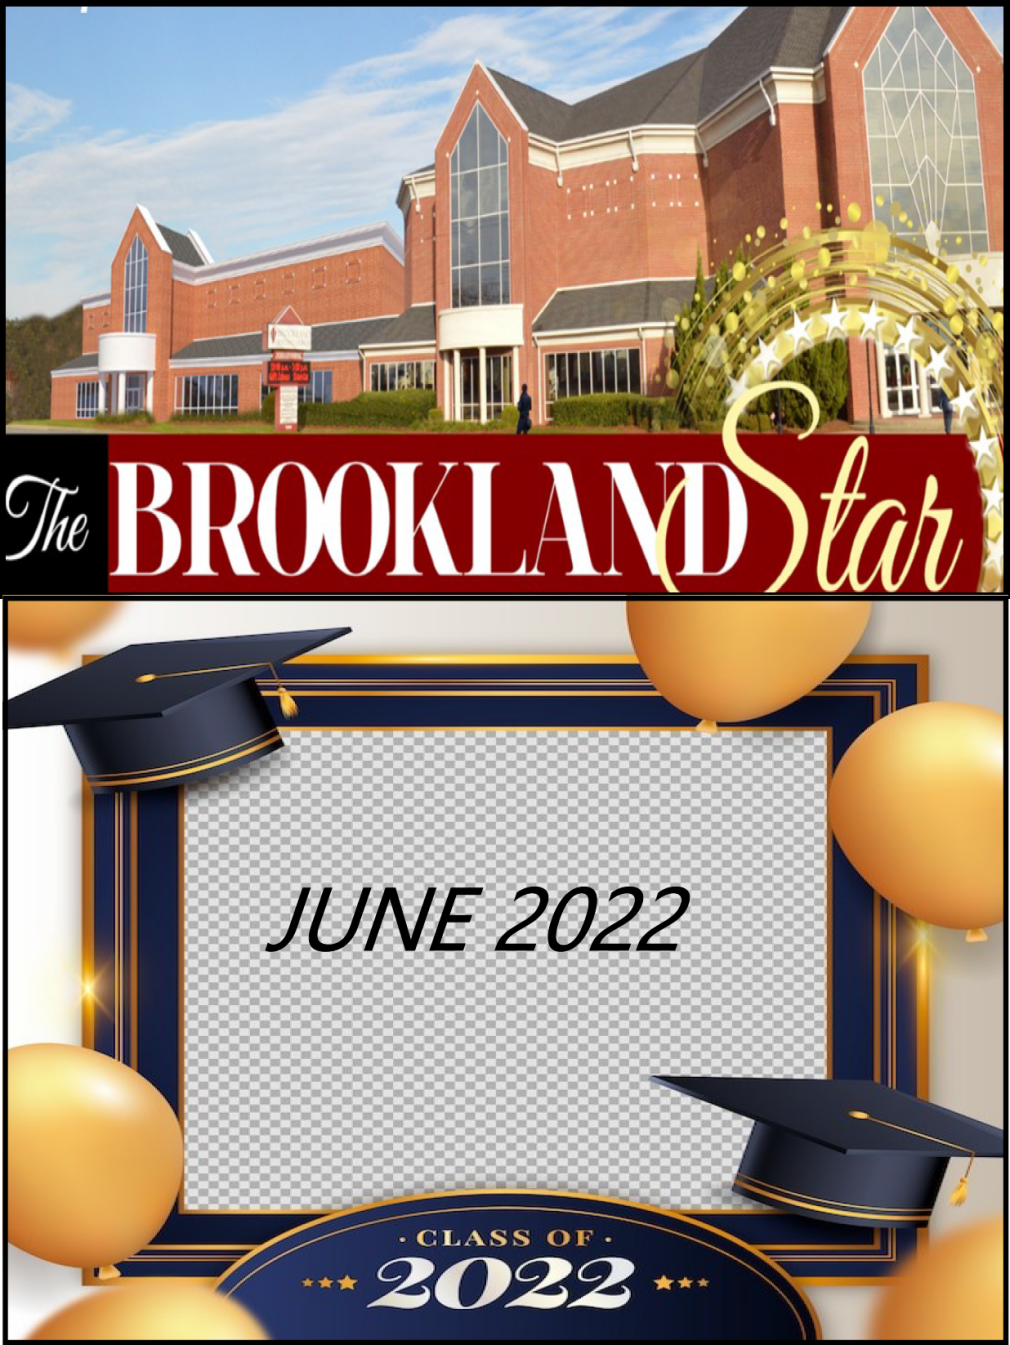 The Brookland Star June 2022 Edition 